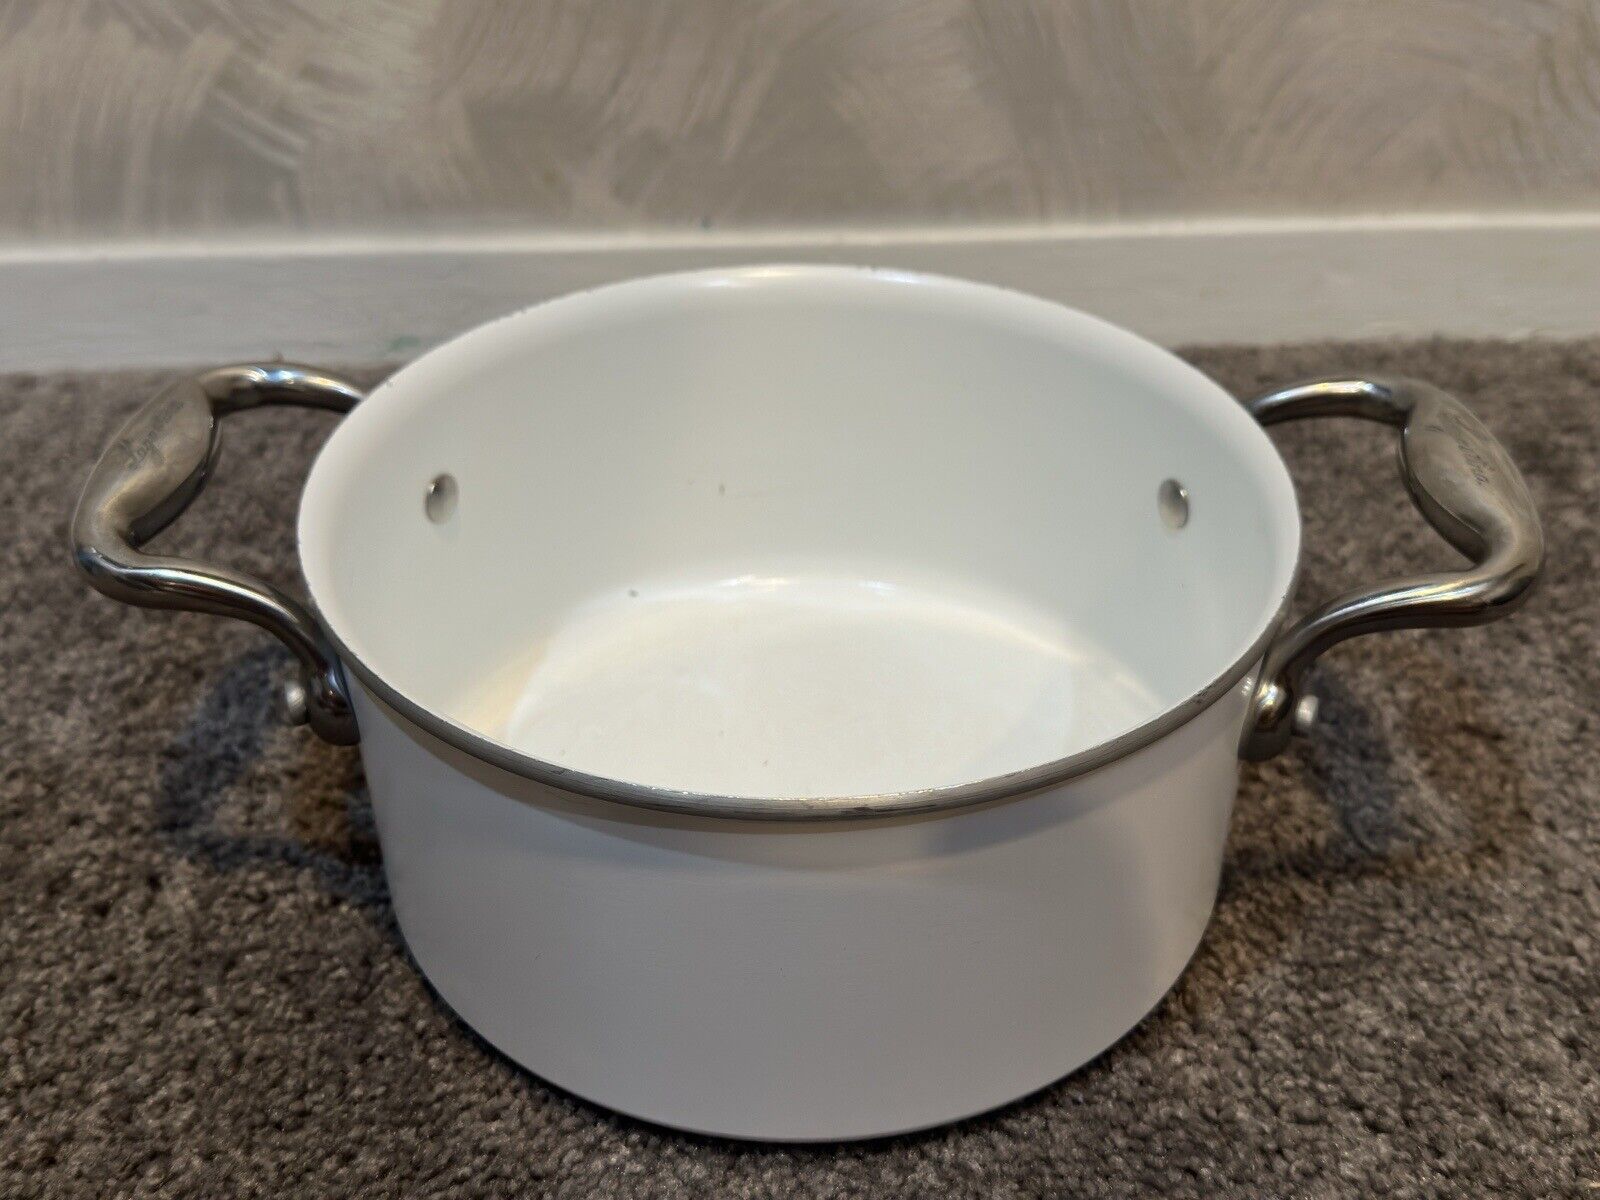 Lagostina Accademia Bianca Stainless Steel Cooking StewPot No Lid Discontinued